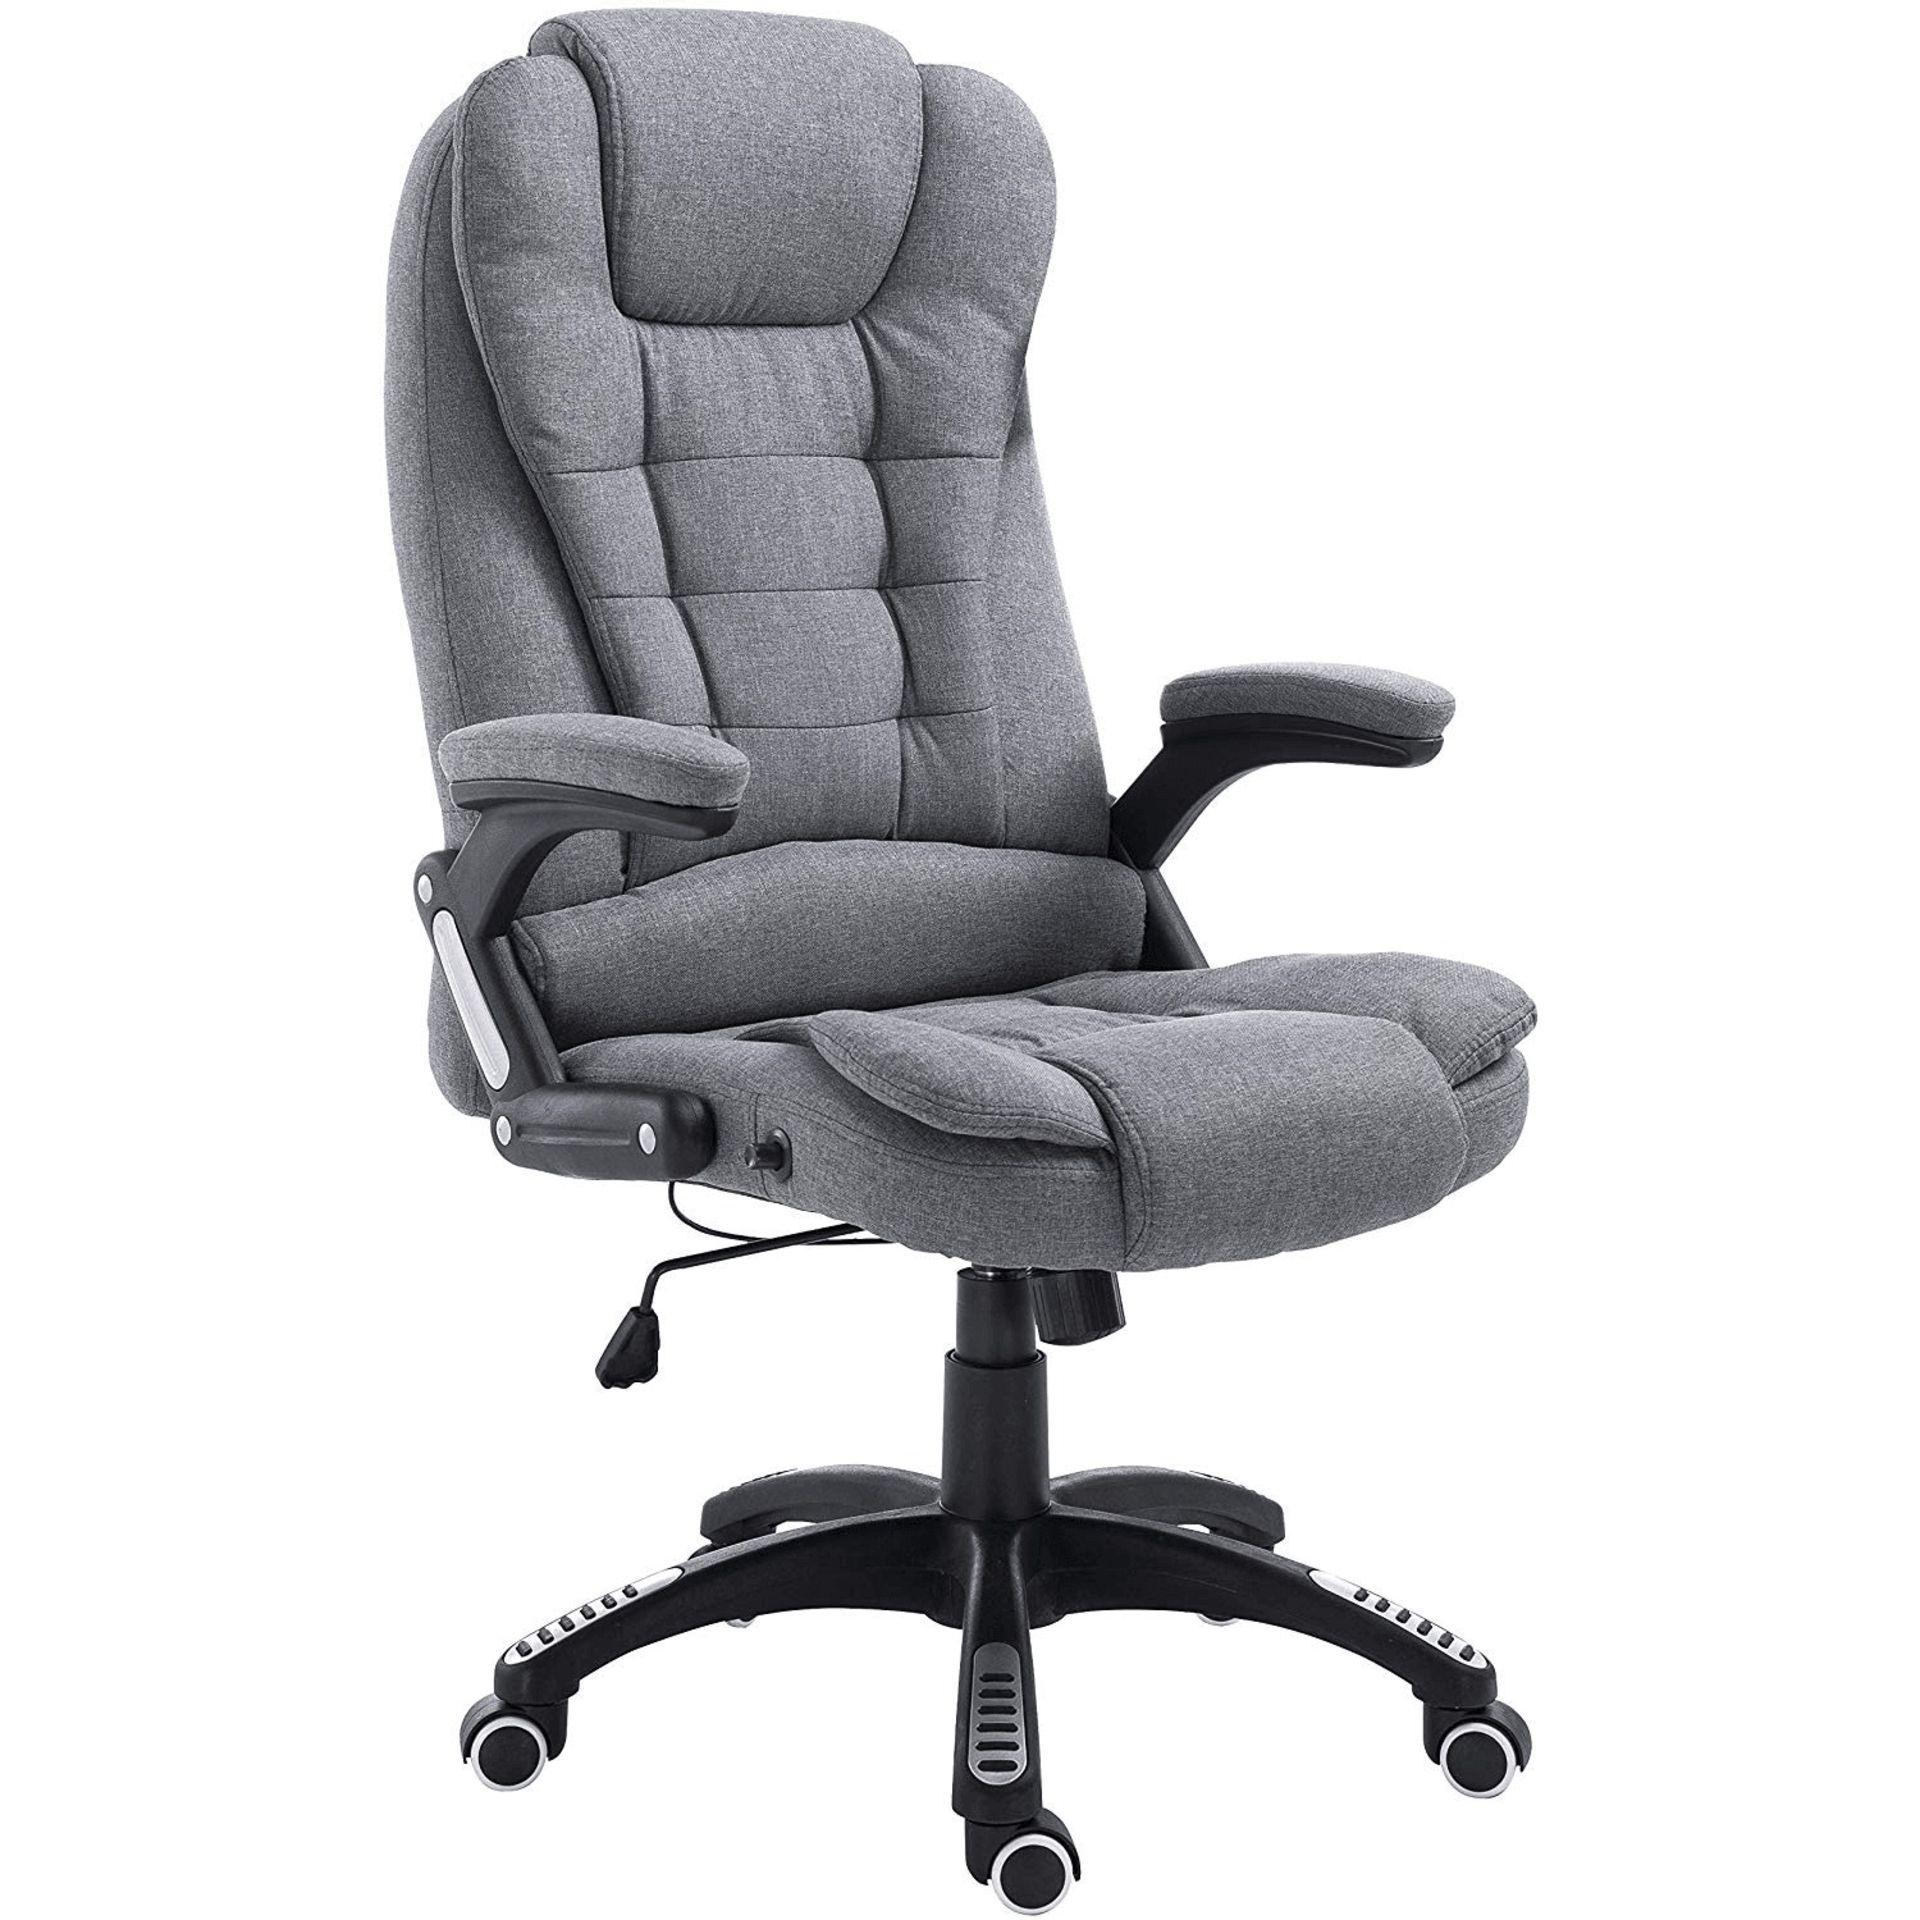 Cherry Tree Furniture Executive Recline Extra Padded Office Chair - ER20